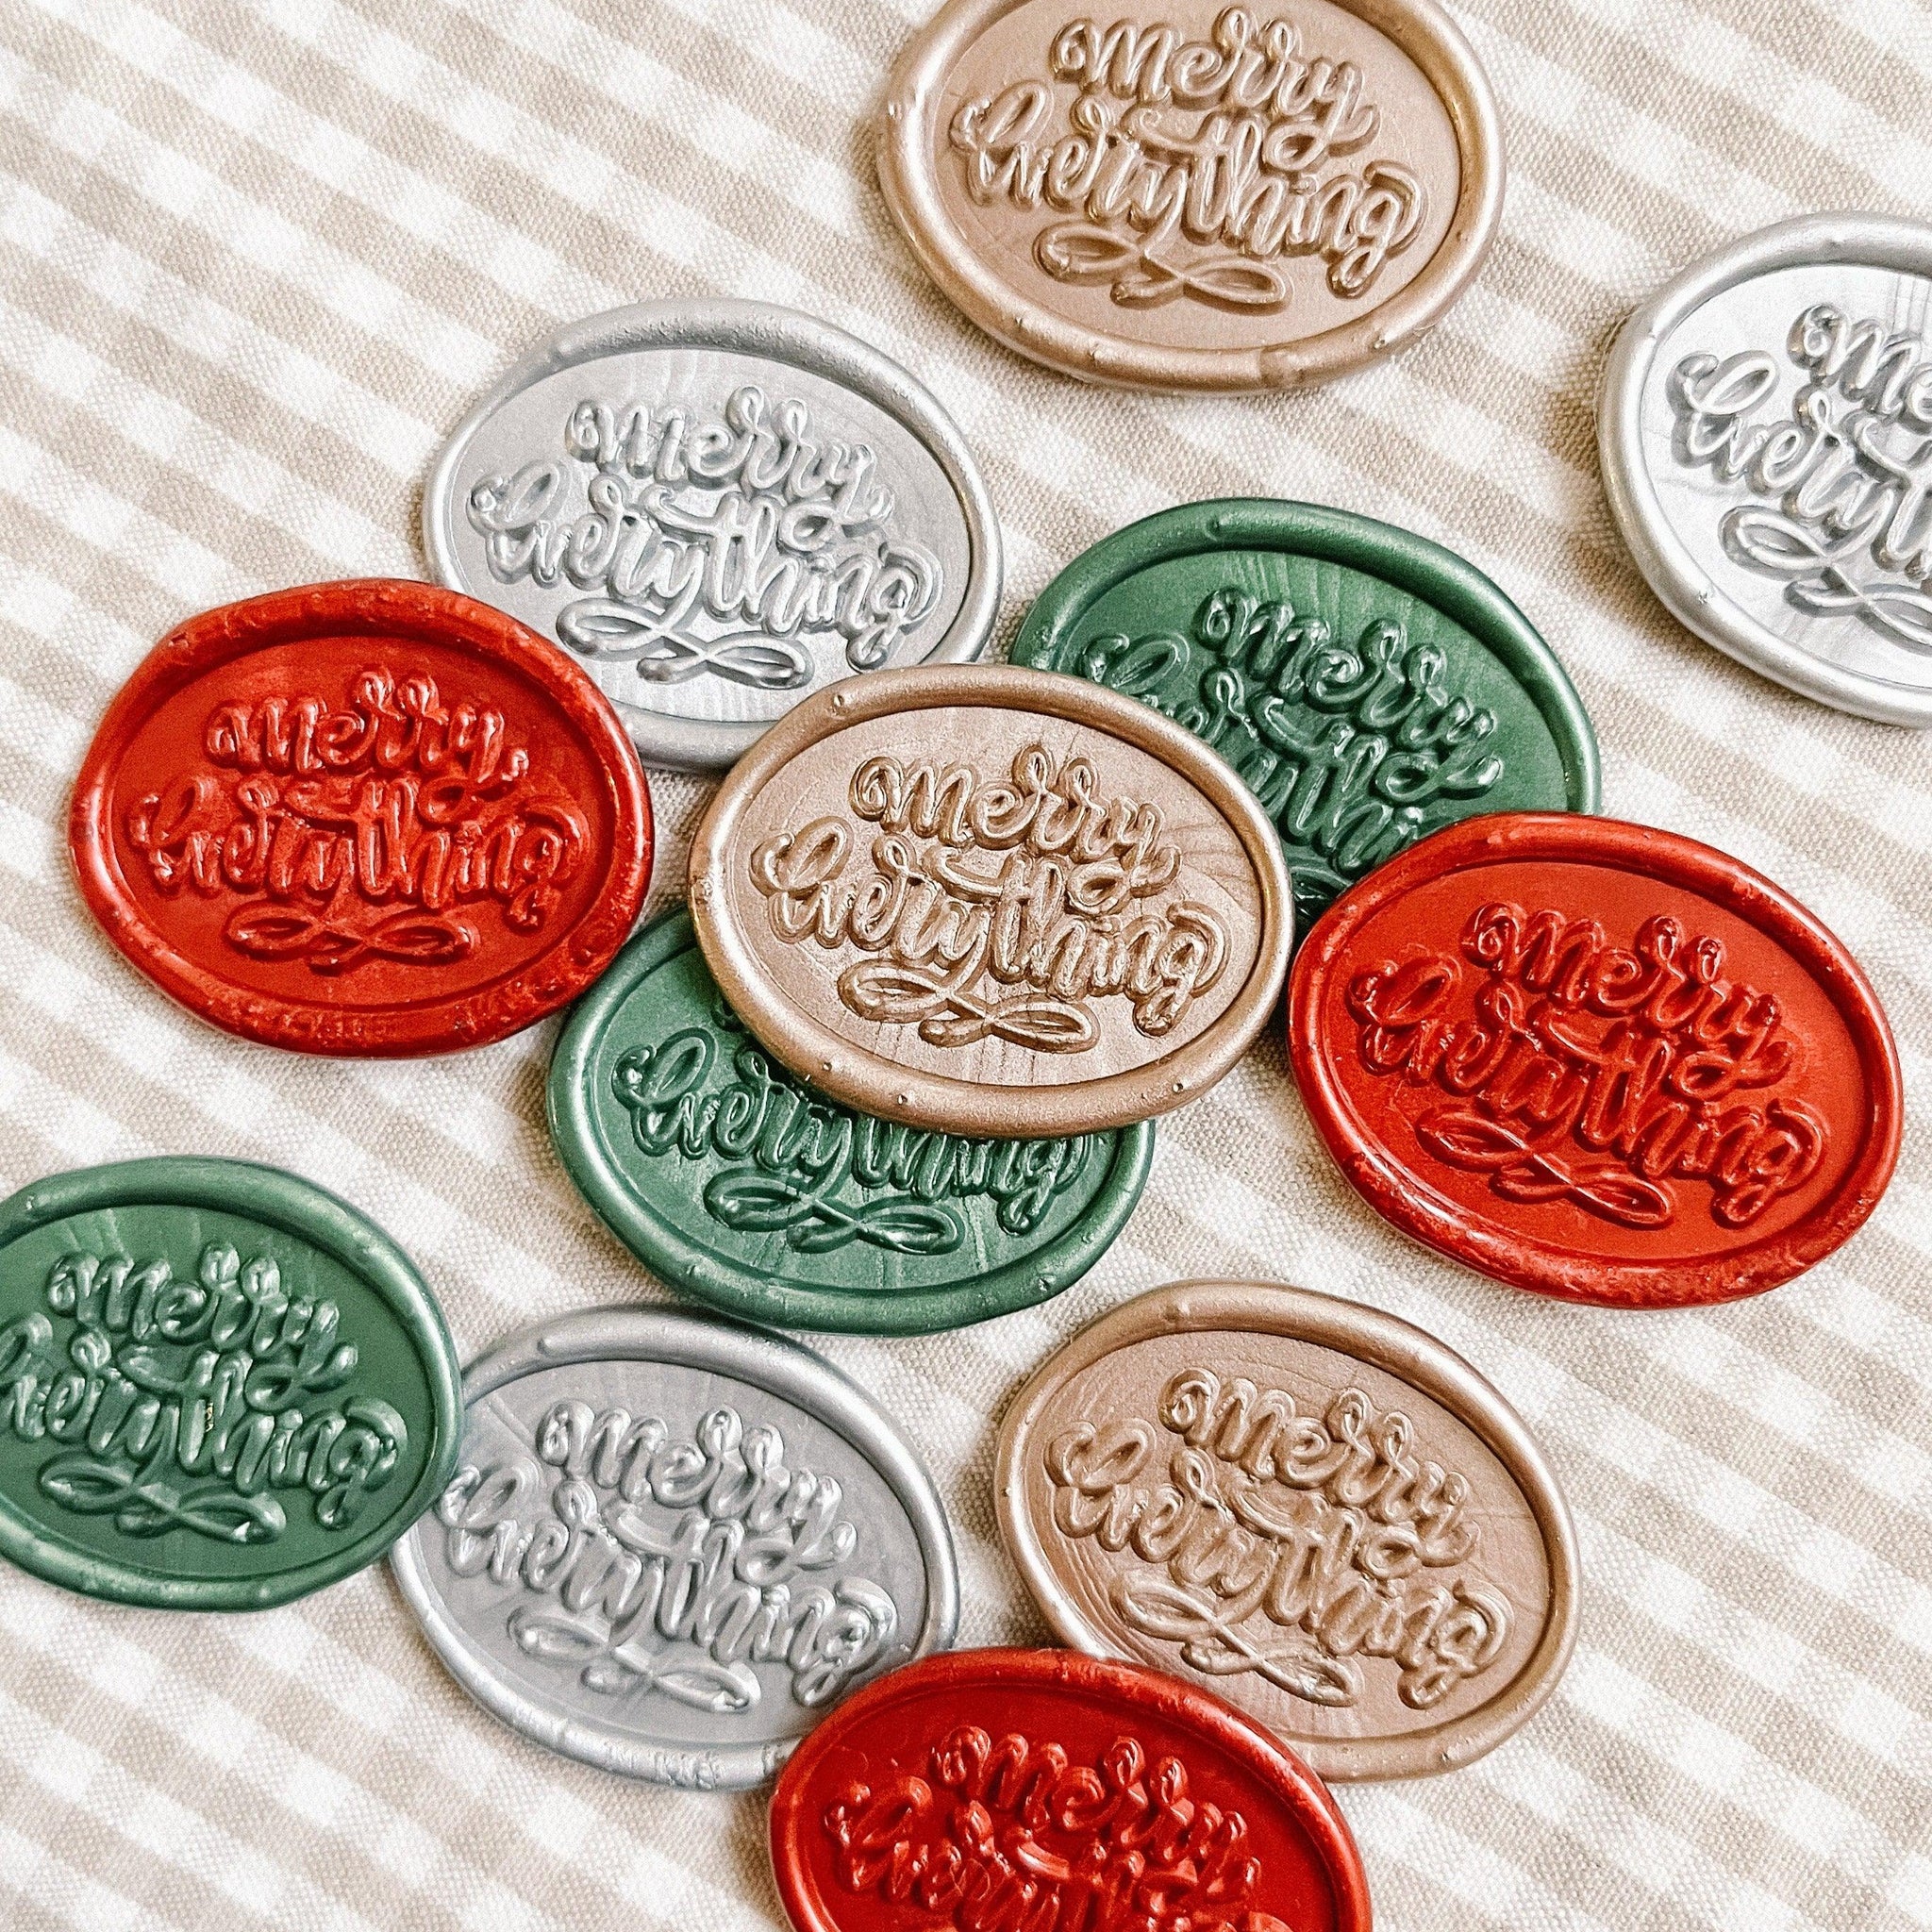 Merry Everything wax seals - Set of 9 - Made of Honour Co.